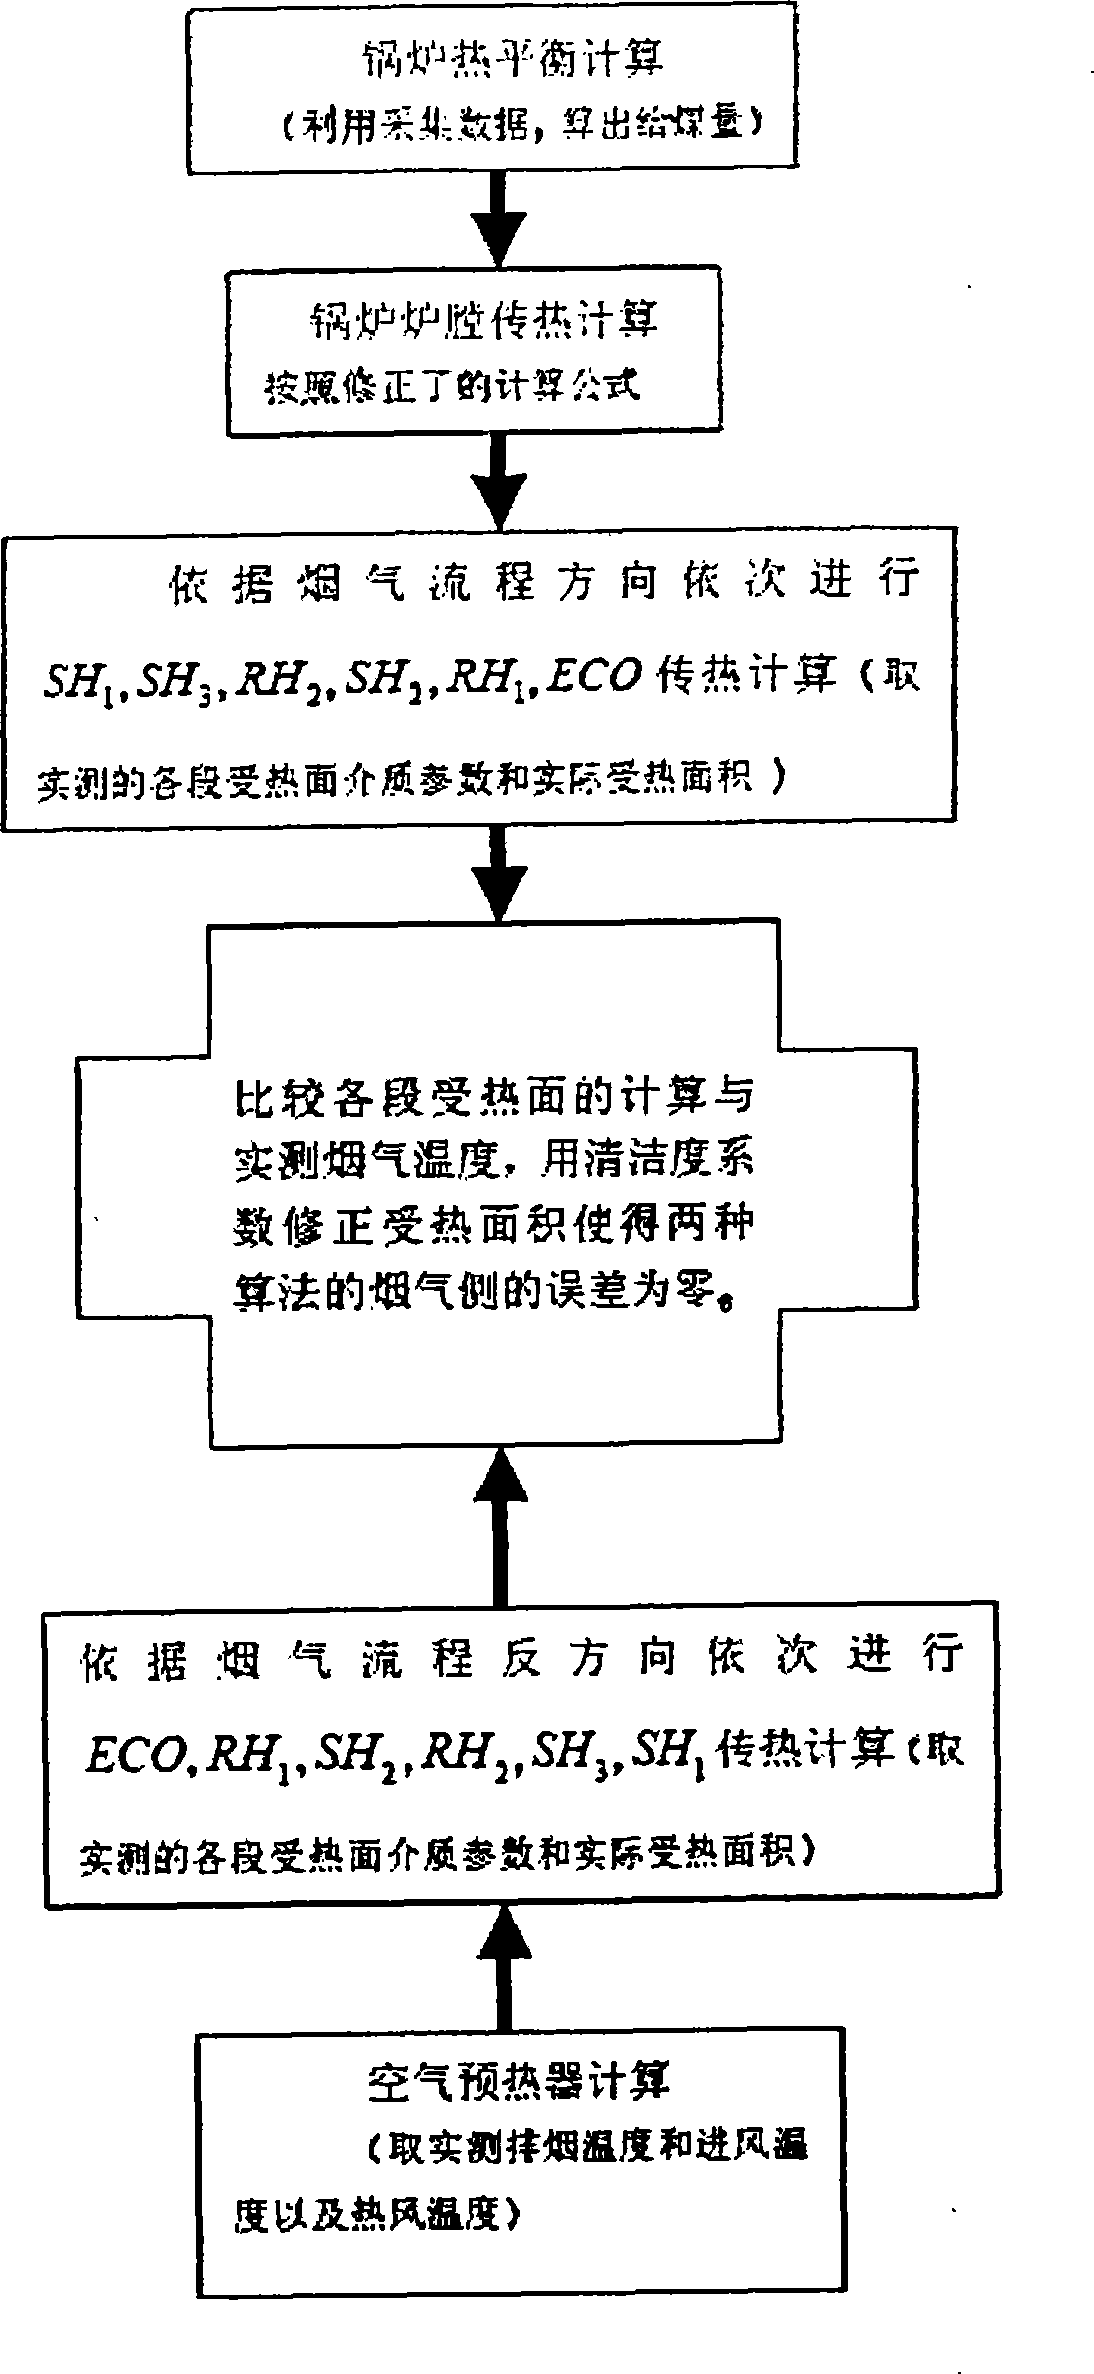 Online detecting, soot blowing and optimal energy-saving method for large coal-fired boiler